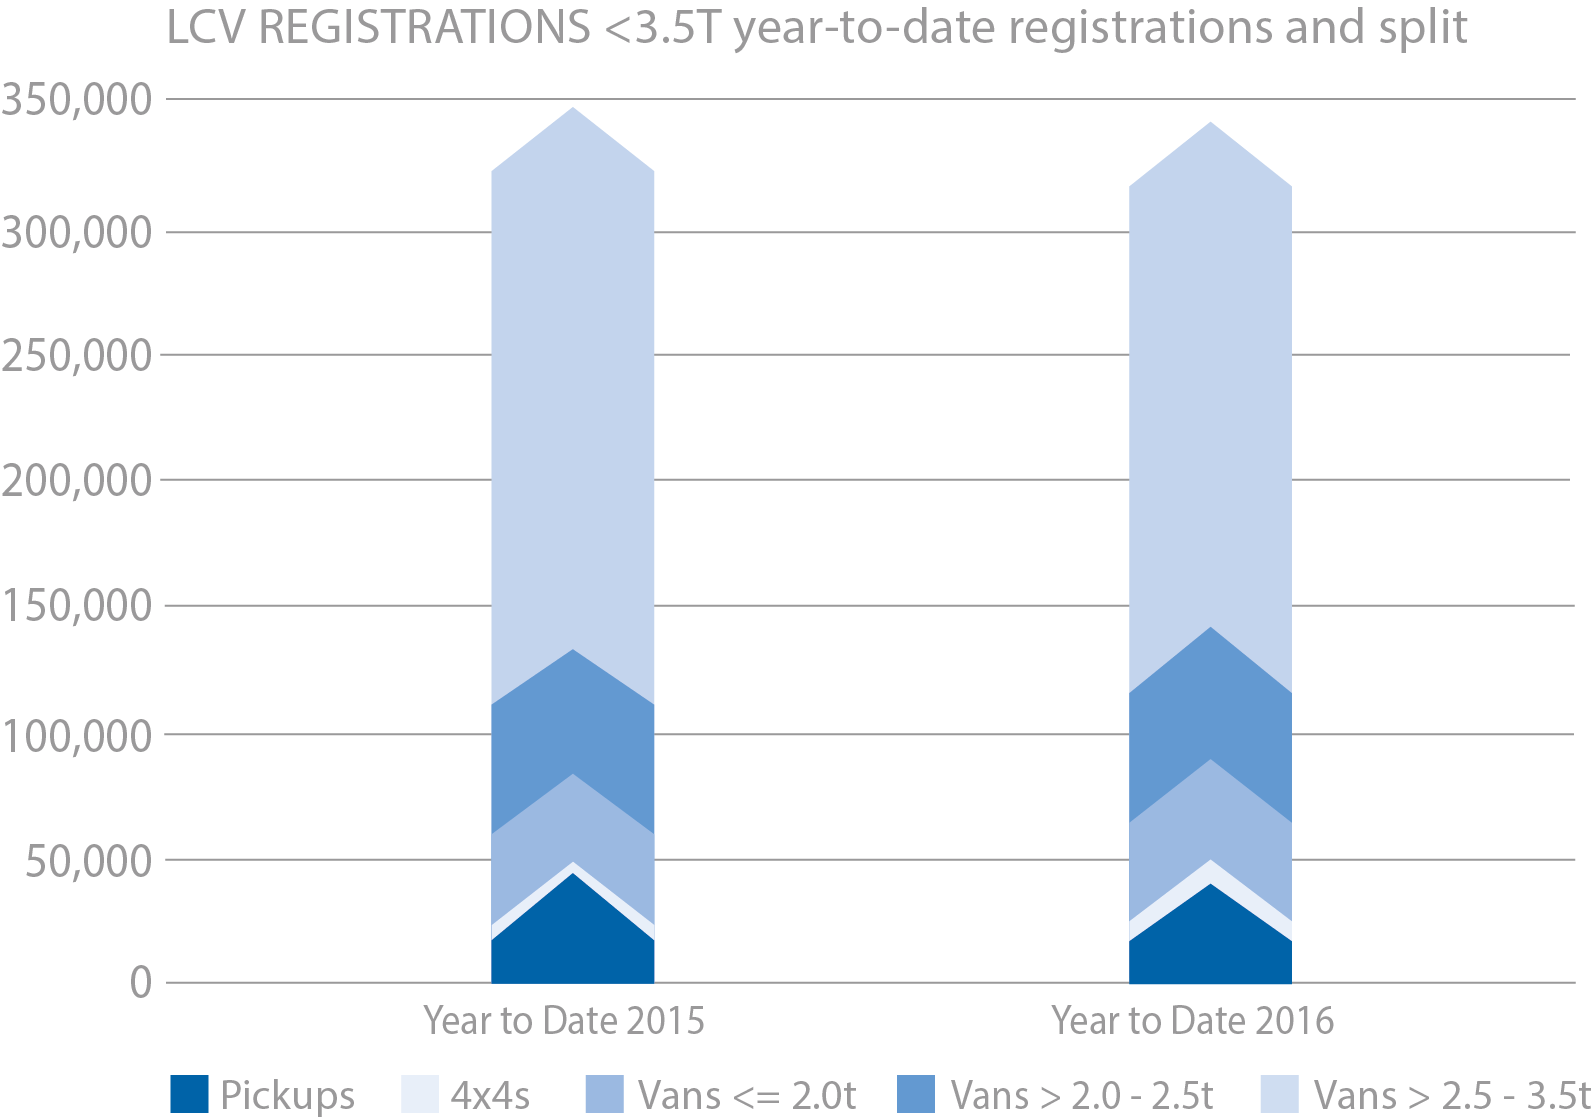 lcv-registrations-3-5t-year-to-date-registrations-and-split-november-2016